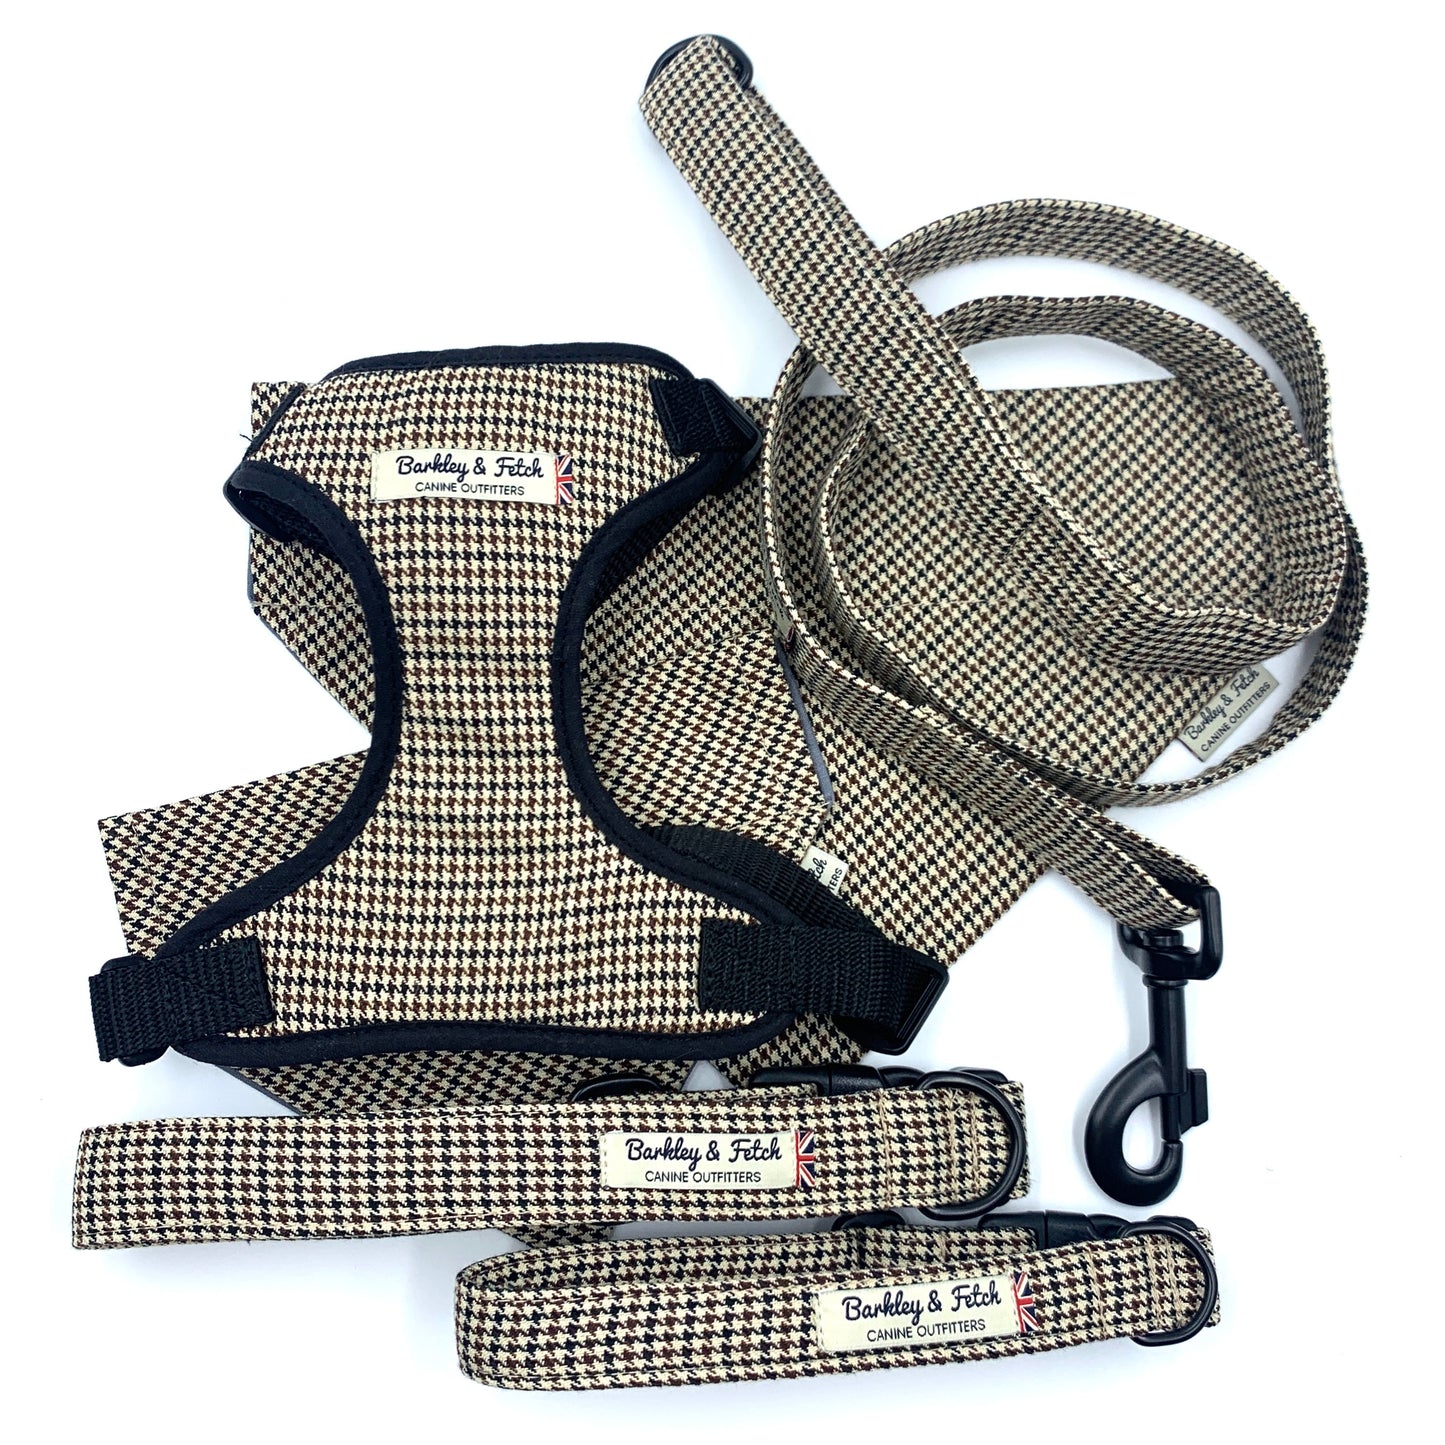 Stone Dogtooth Check Fabric Harness